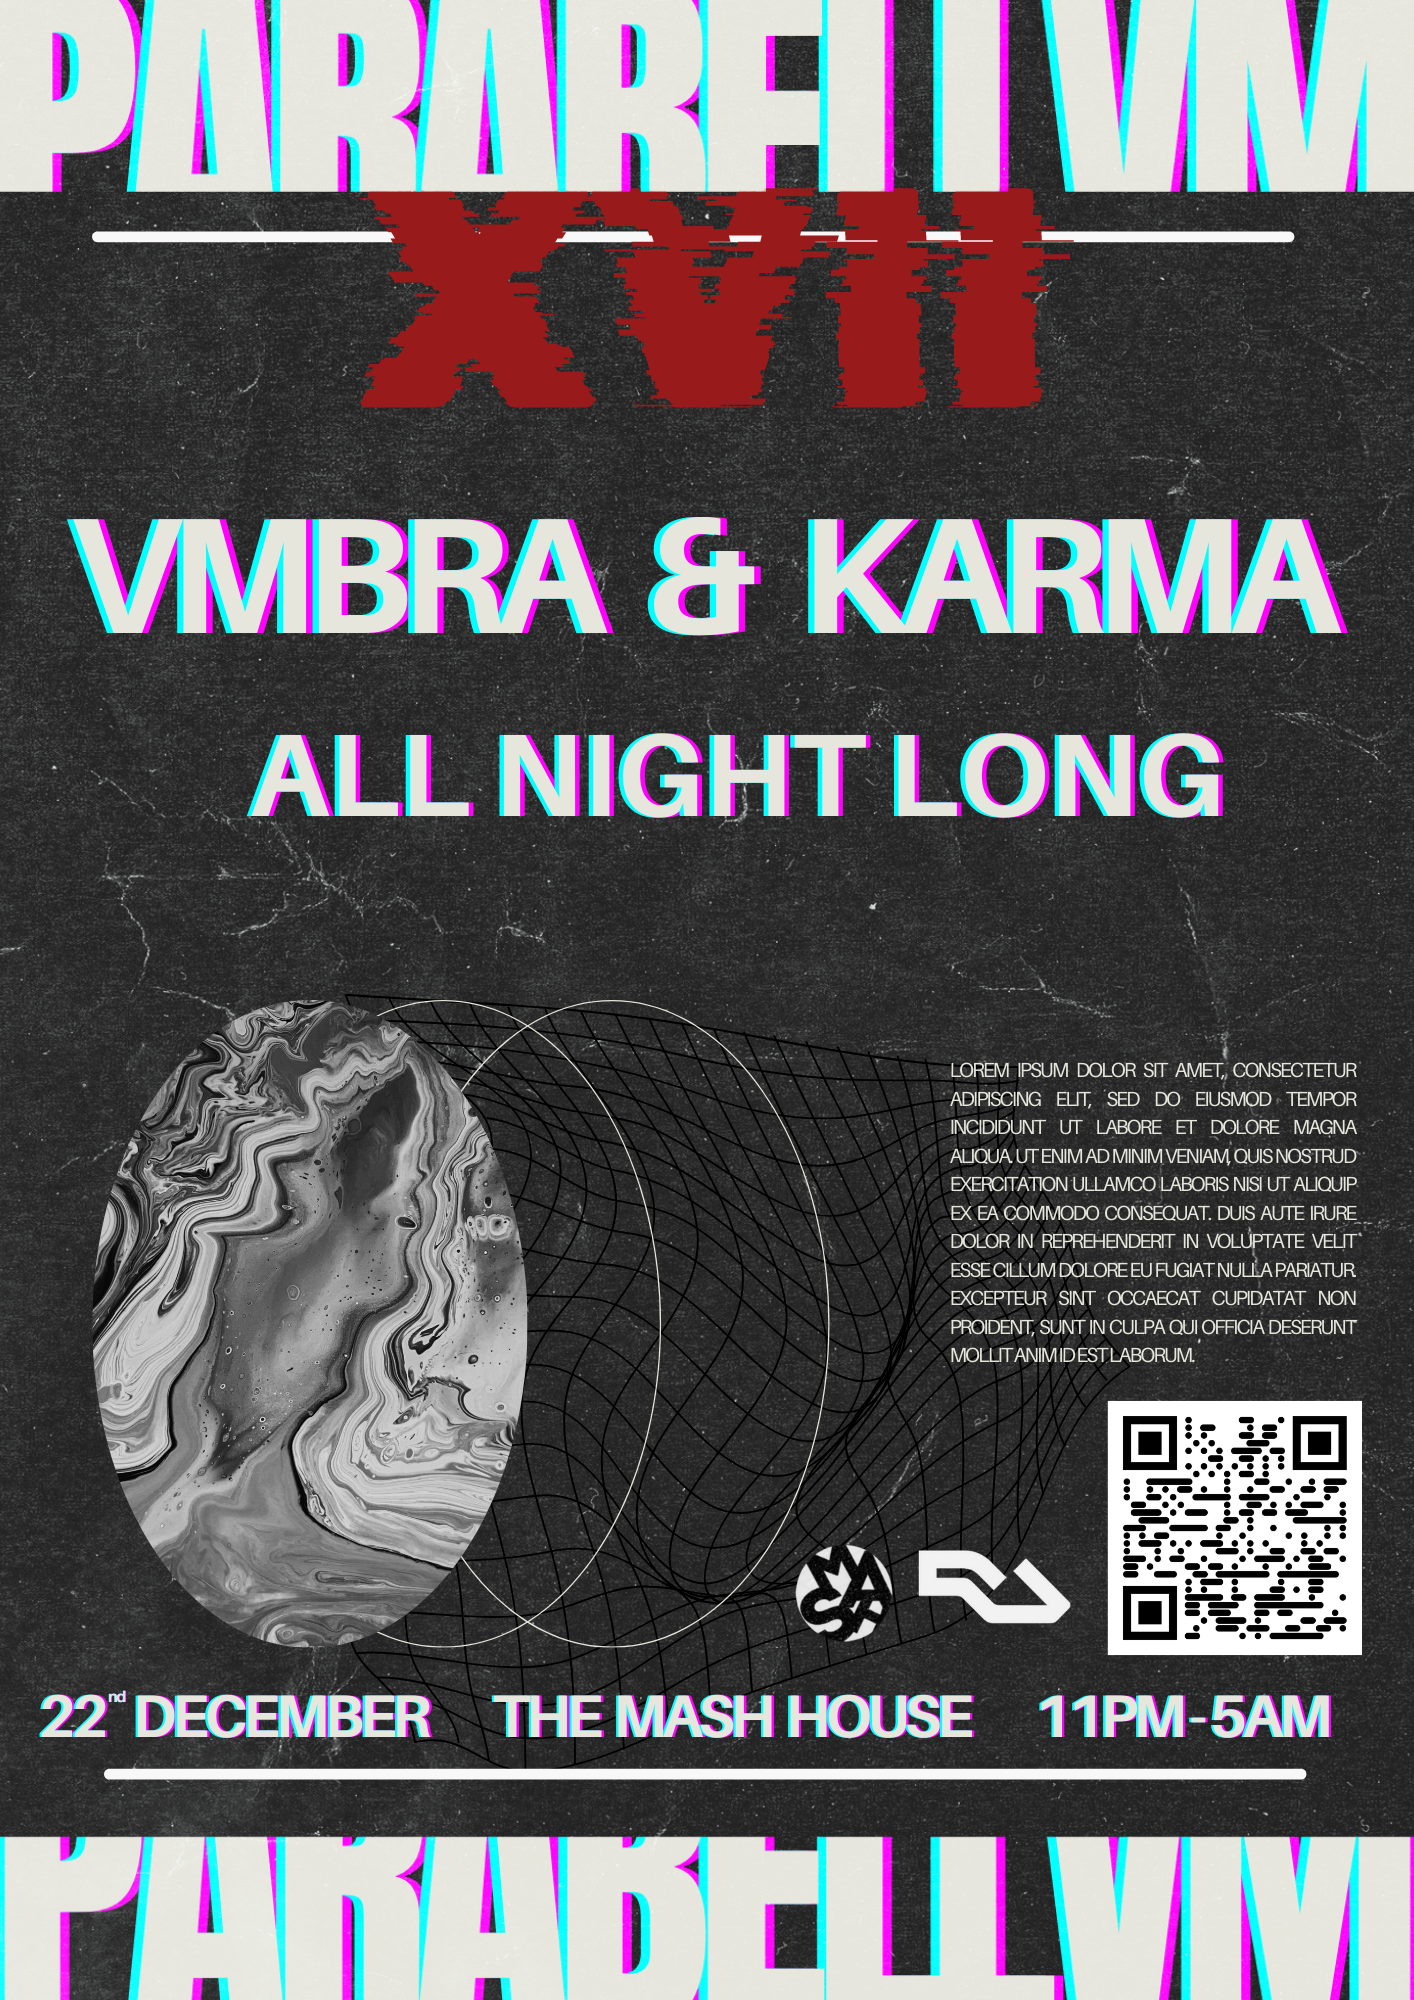 PARABELLVM XVII w / 5AM RESIDENTS ALL NIGHT LONG - フライヤー表